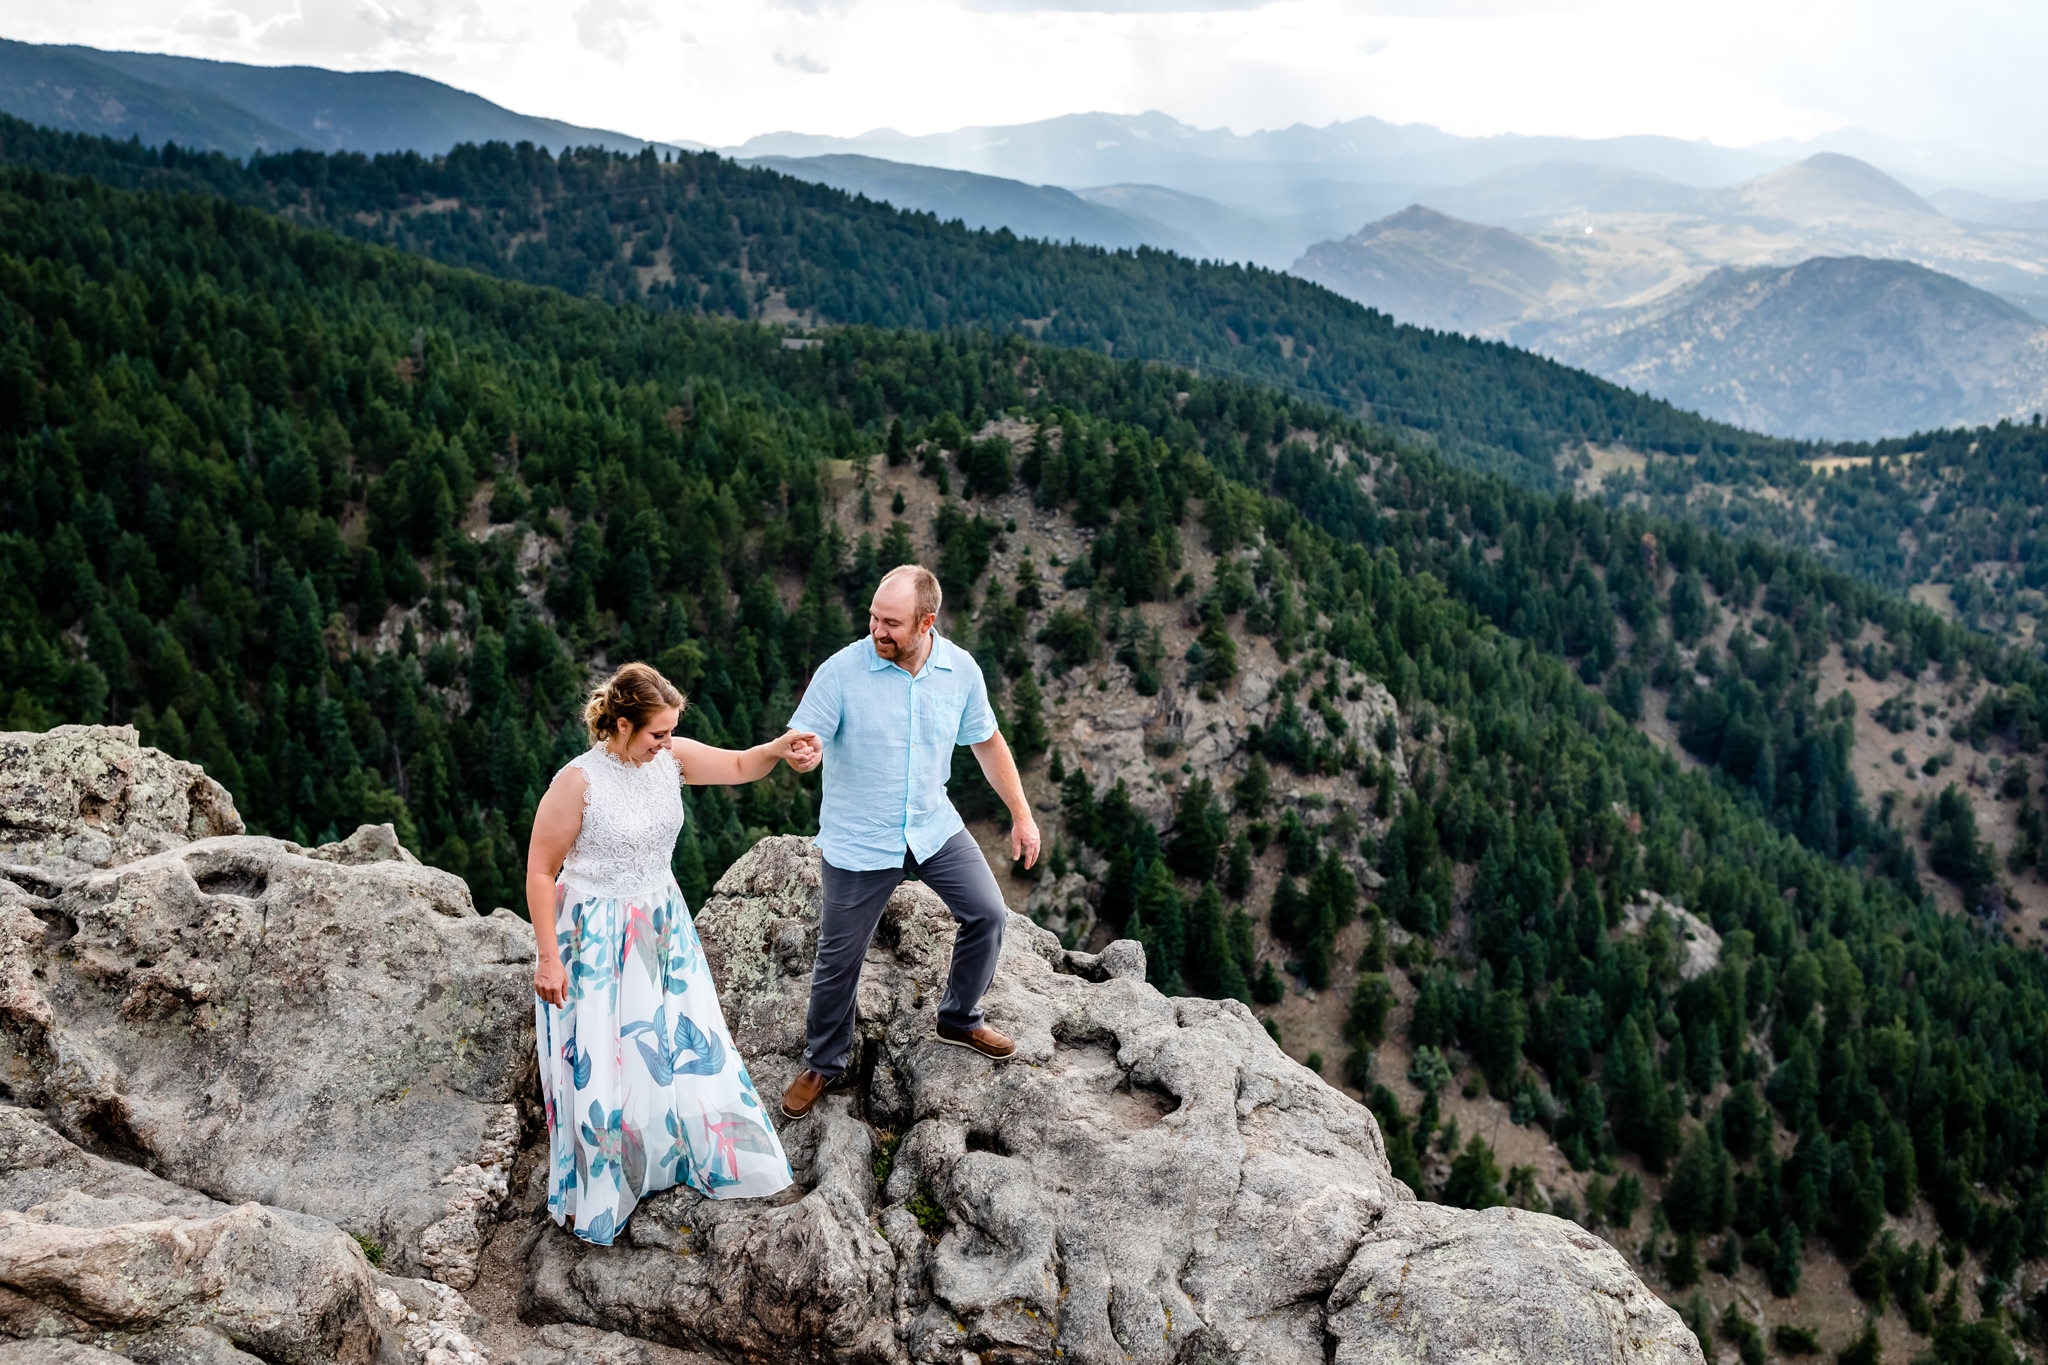 Taylor helping Lauren walk across the mountain ridge on top of Lost Gulch Overlook. Mountain Fall Engagement Session by Colorado Engagement Photographer, Jennifer Garza. Colorado Fall Engagement, Colorado Fall Engagement Photos, Fall Engagement Photography, Fall Engagement Photos, Colorado Engagement Photographer, Colorado Engagement Photography, Mountain Engagement Photographer, Mountain Engagement, Mountain Engagement Photos, Rocky Mountain Bride, Wedding Inspo, Wedding Season, Colorado Wedding, Colorado Bride, Bride to Be, Couples Goals